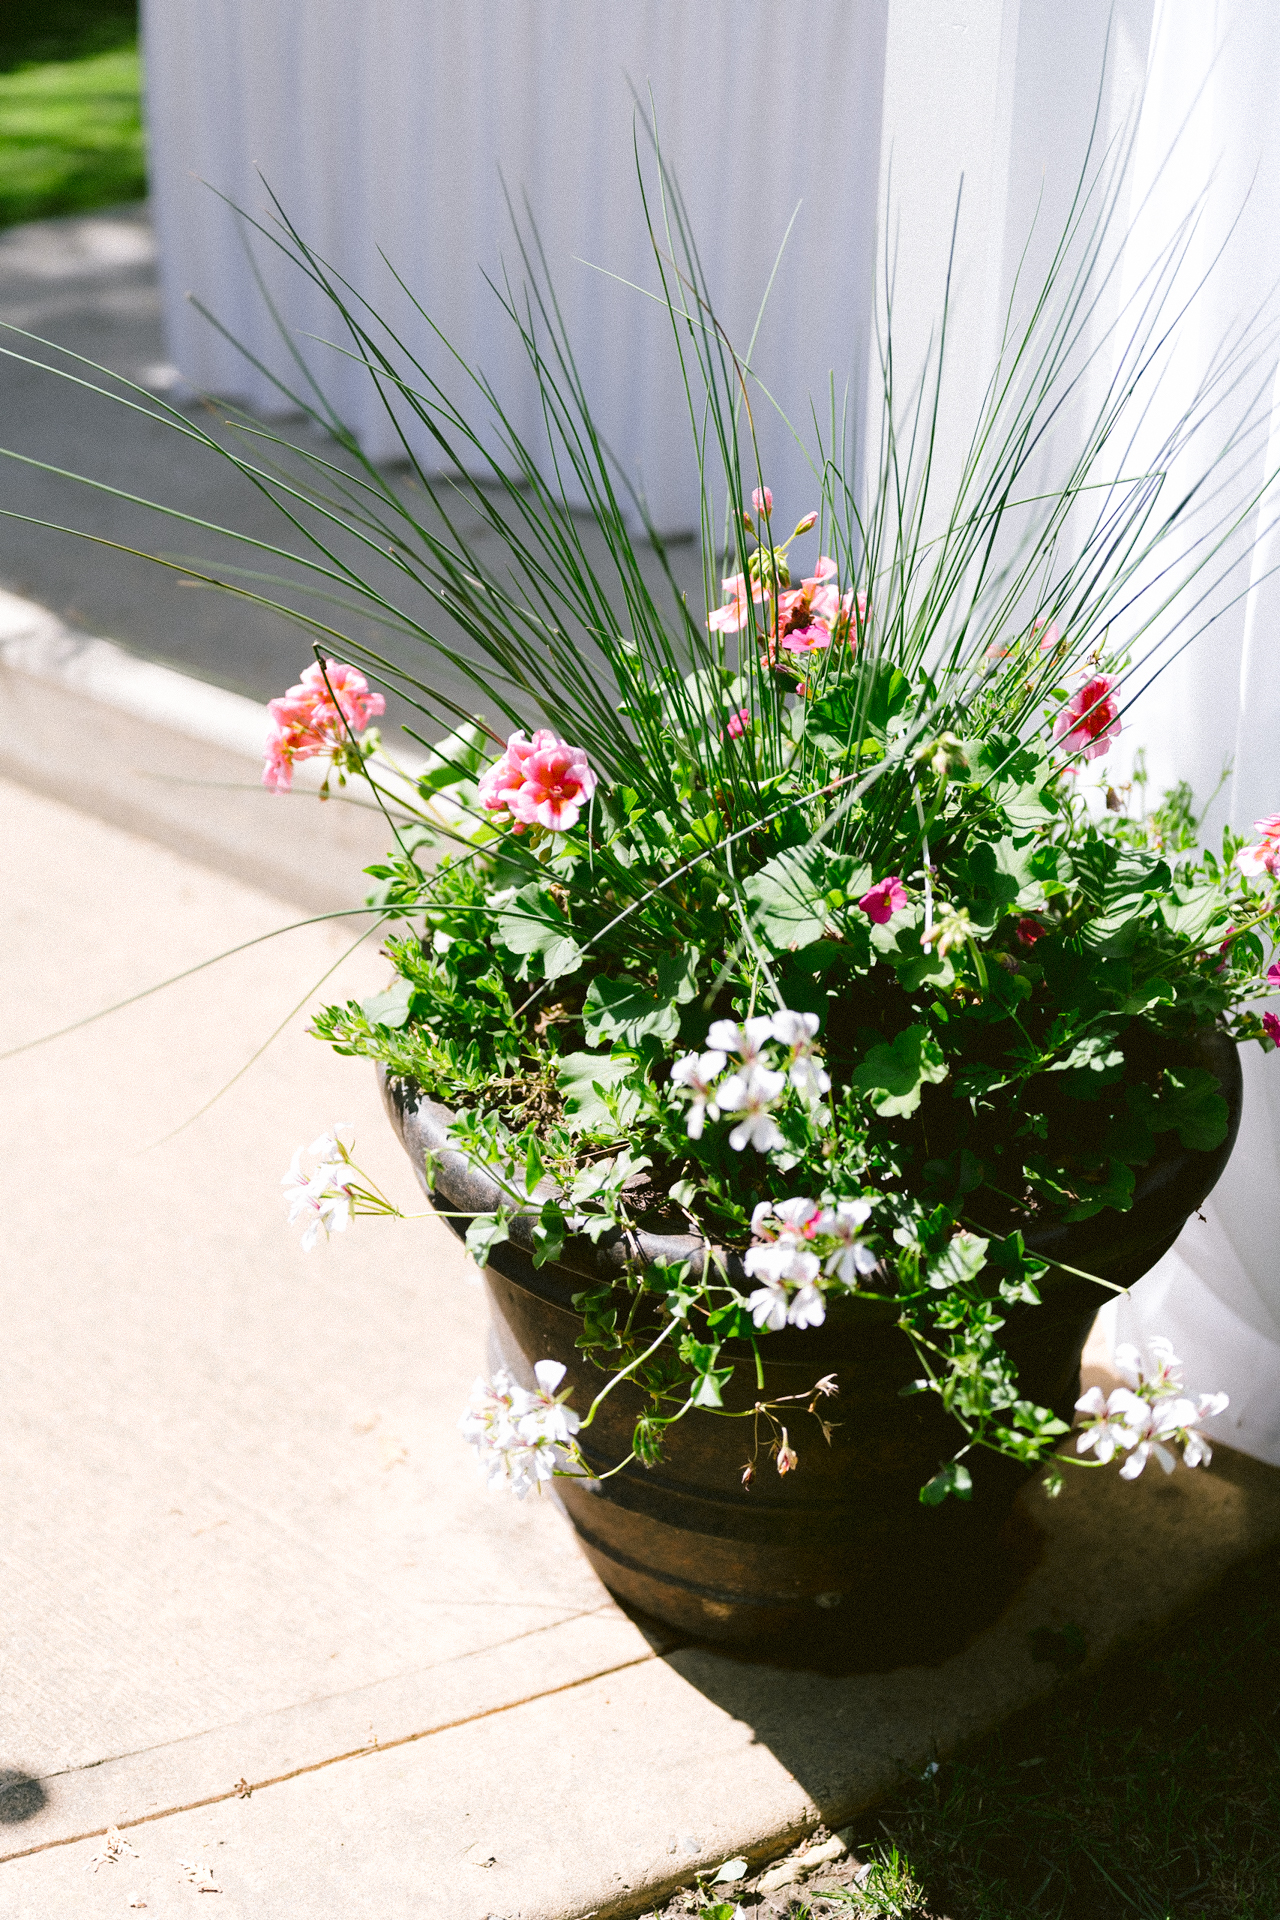 A potted plant with a mix of green foliage and pink flowers sitting in sunlight.